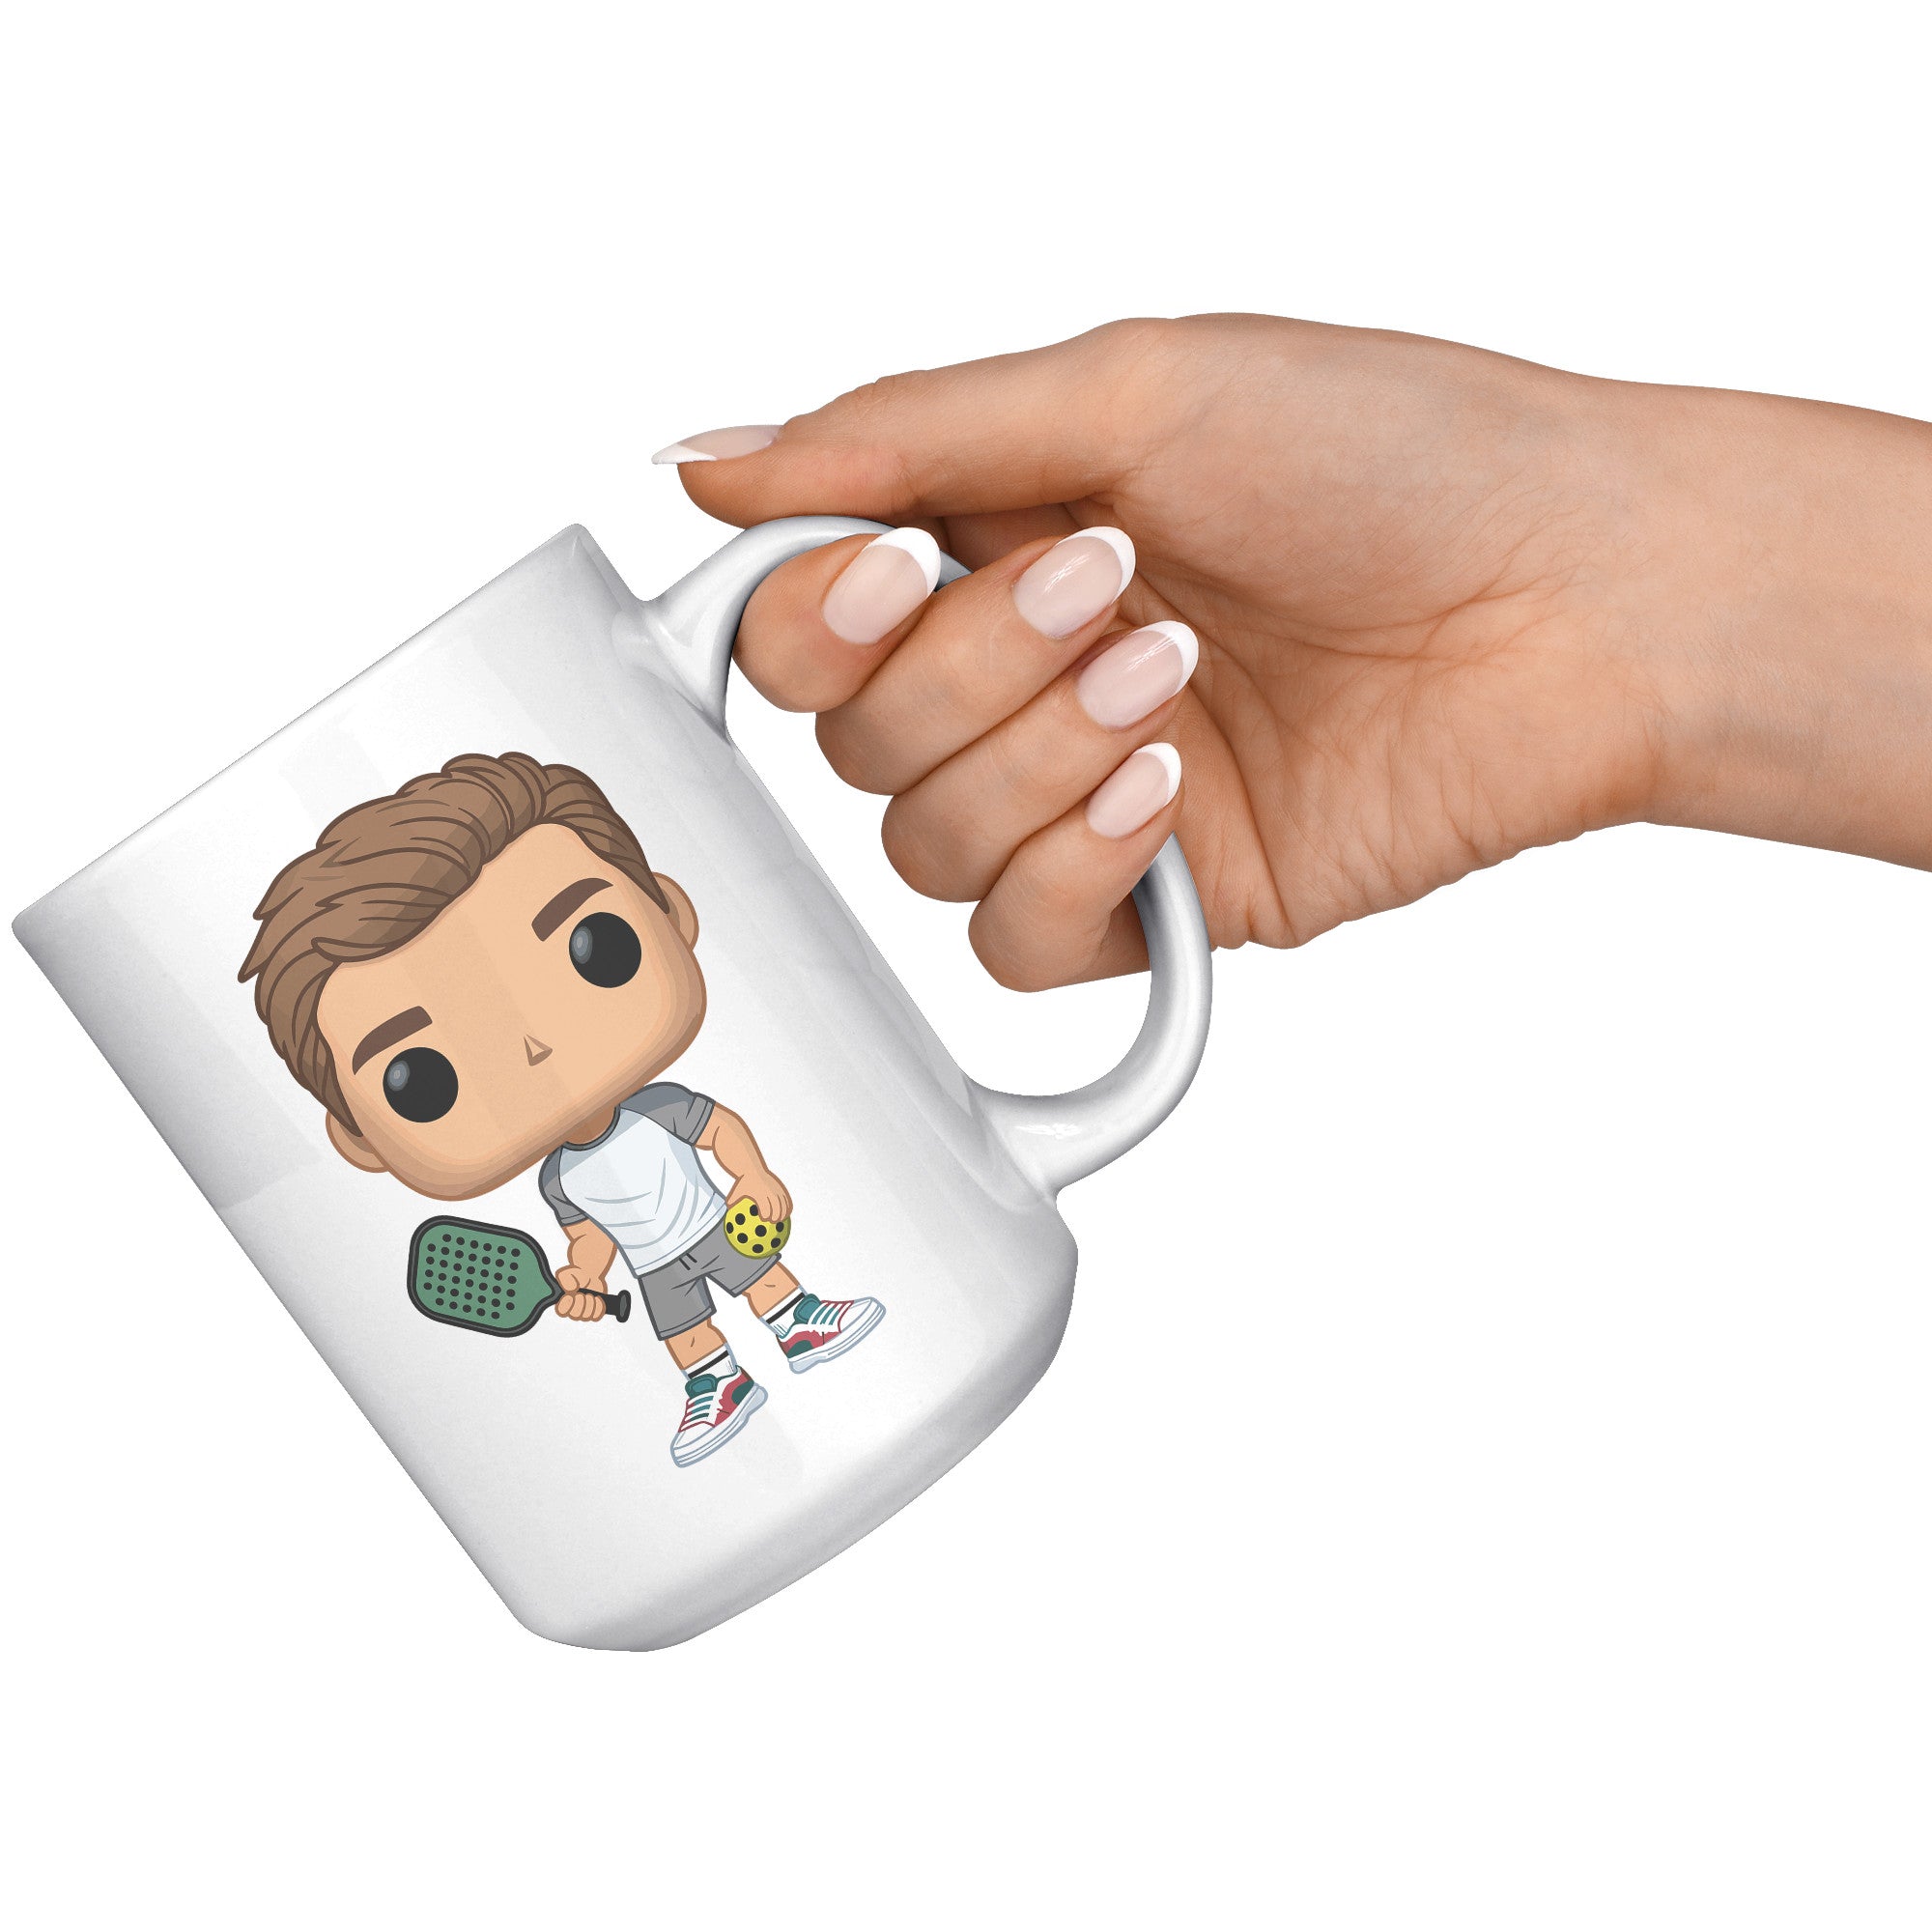 "Funko Pop Style Pickle Ball Player Boy Coffee Mug - Cute Athletic Cup - Perfect Gift for Pickle Ball Enthusiasts - Sporty Boy Apparel" - C1